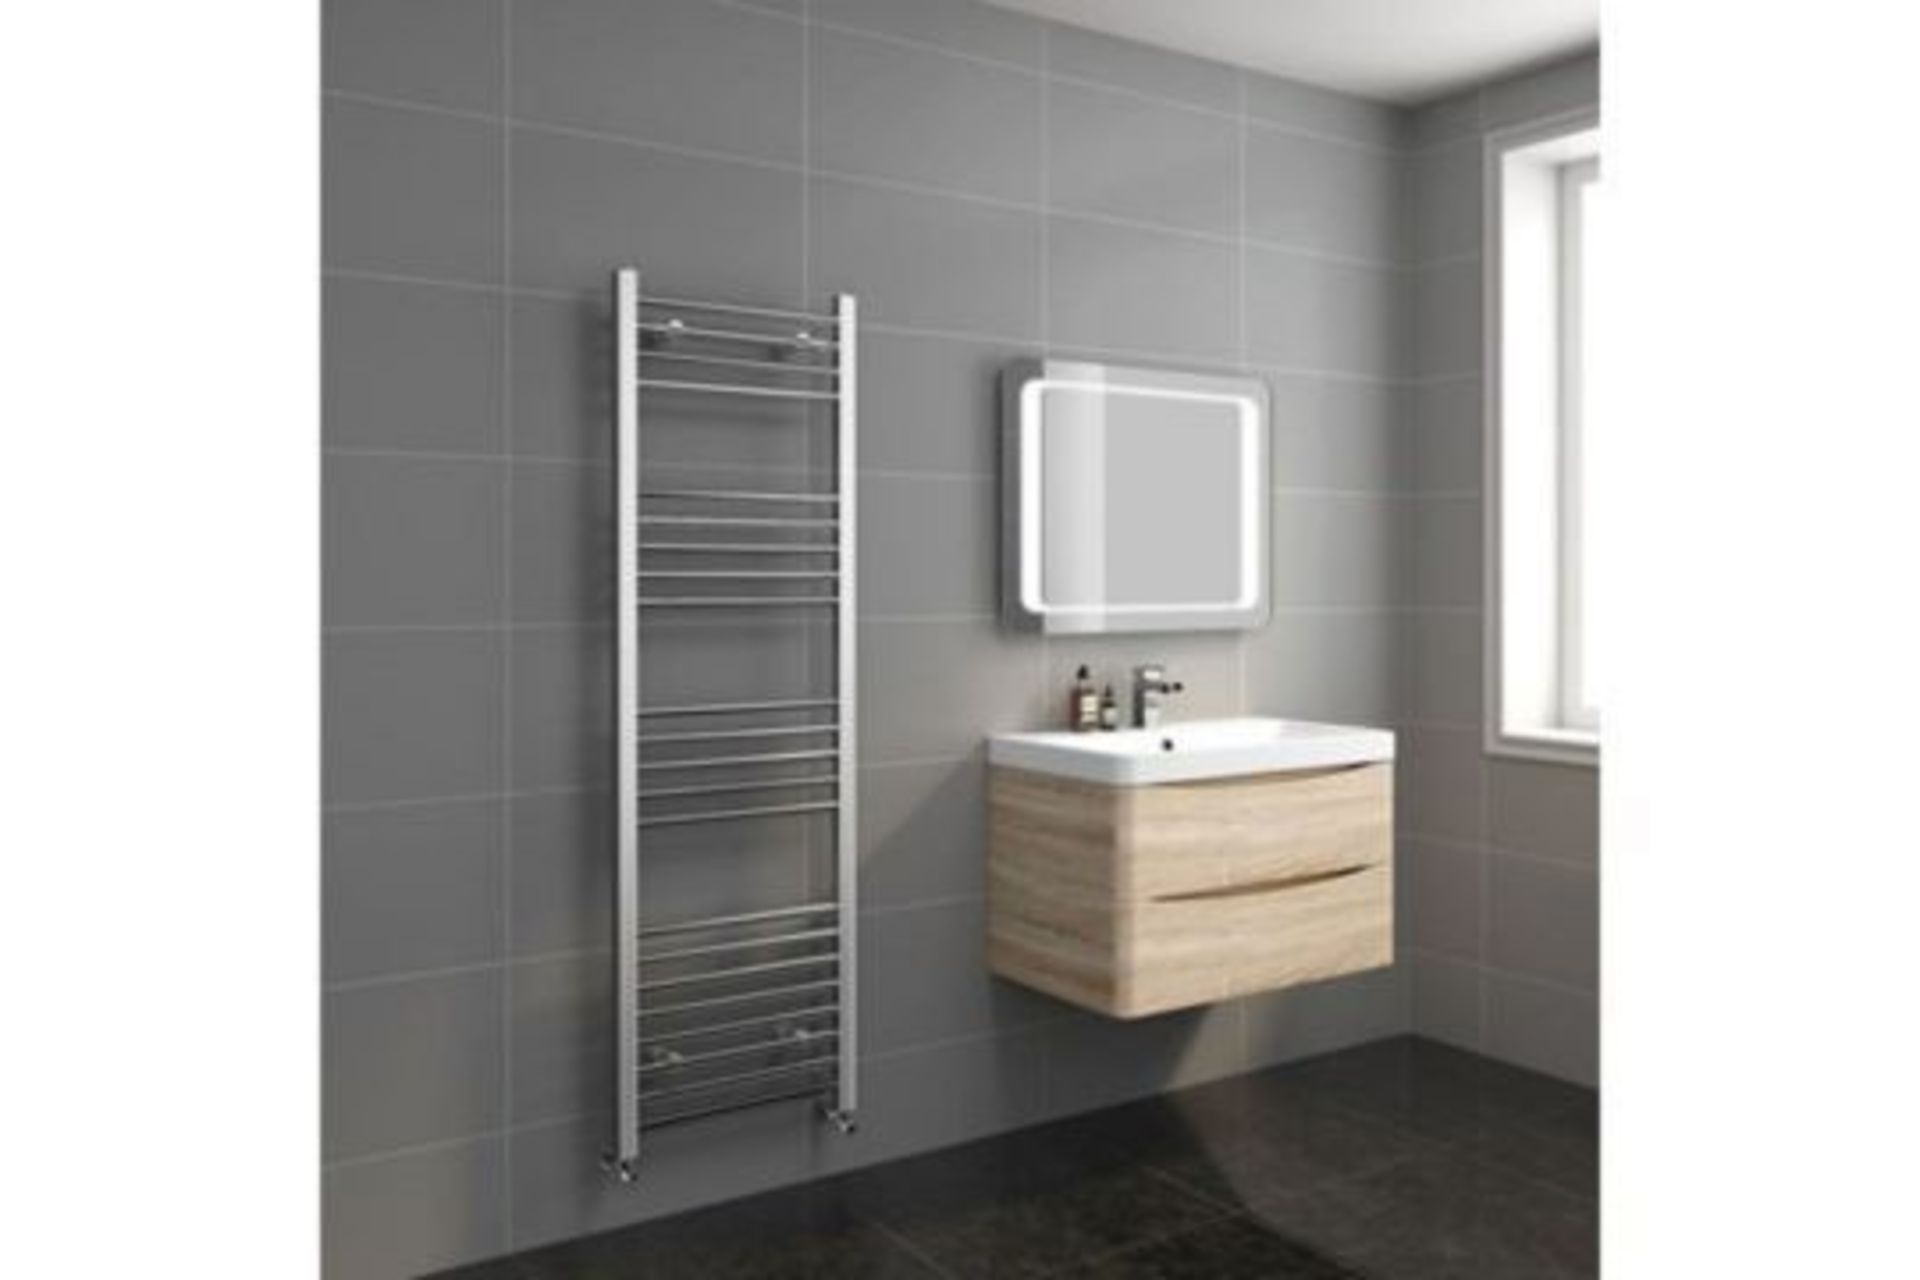 New & Boxed 1600x500 mm - 20 mm Tubes - Chrome Heated Straight Rail Ladder Towel Radiator. Ns160 - Image 2 of 2